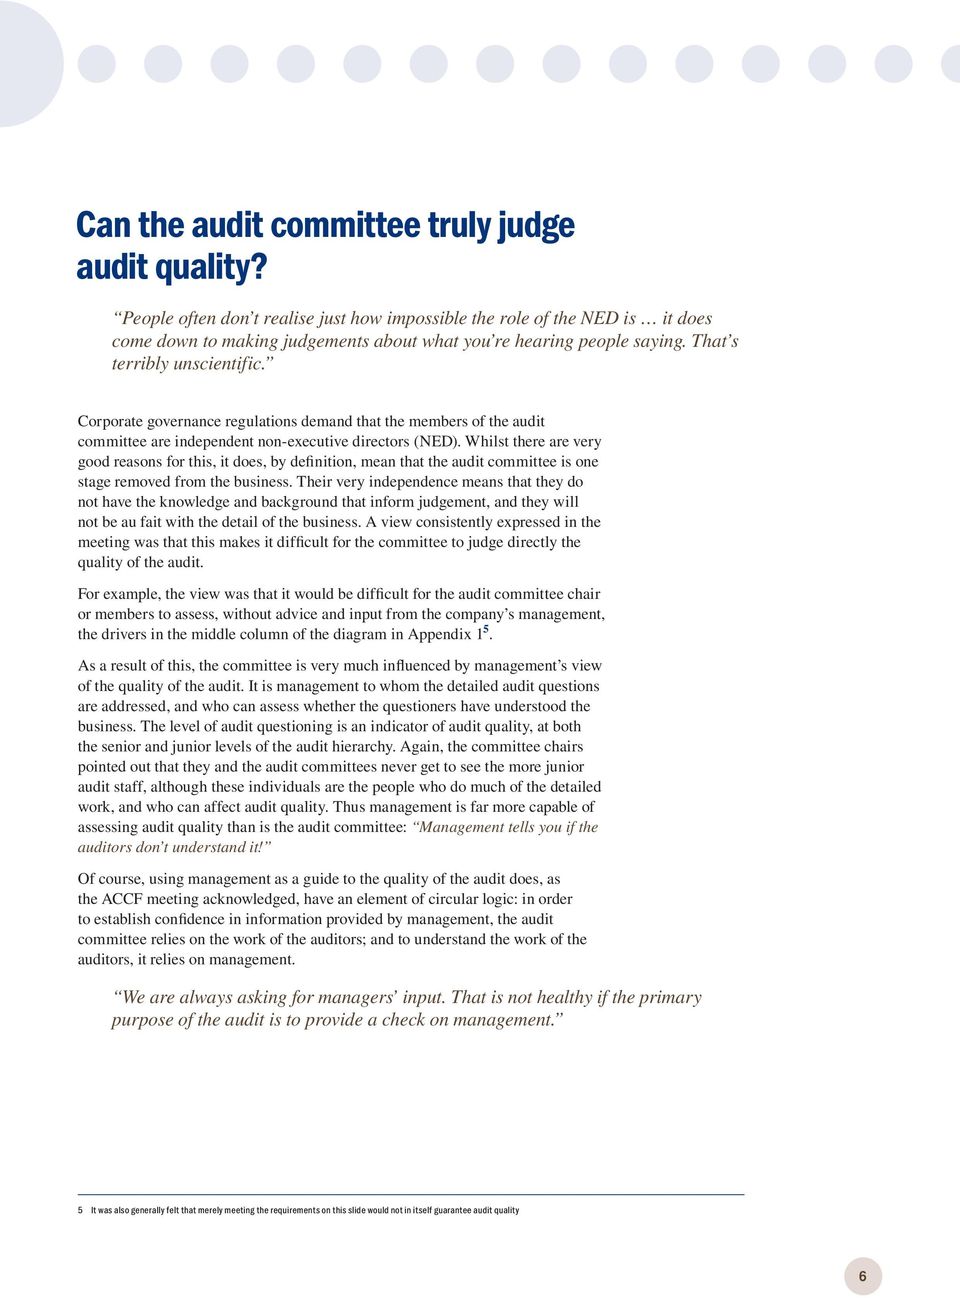 Whilst there are very good reasons for this, it does, by definition, mean that the audit committee is one stage removed from the business.